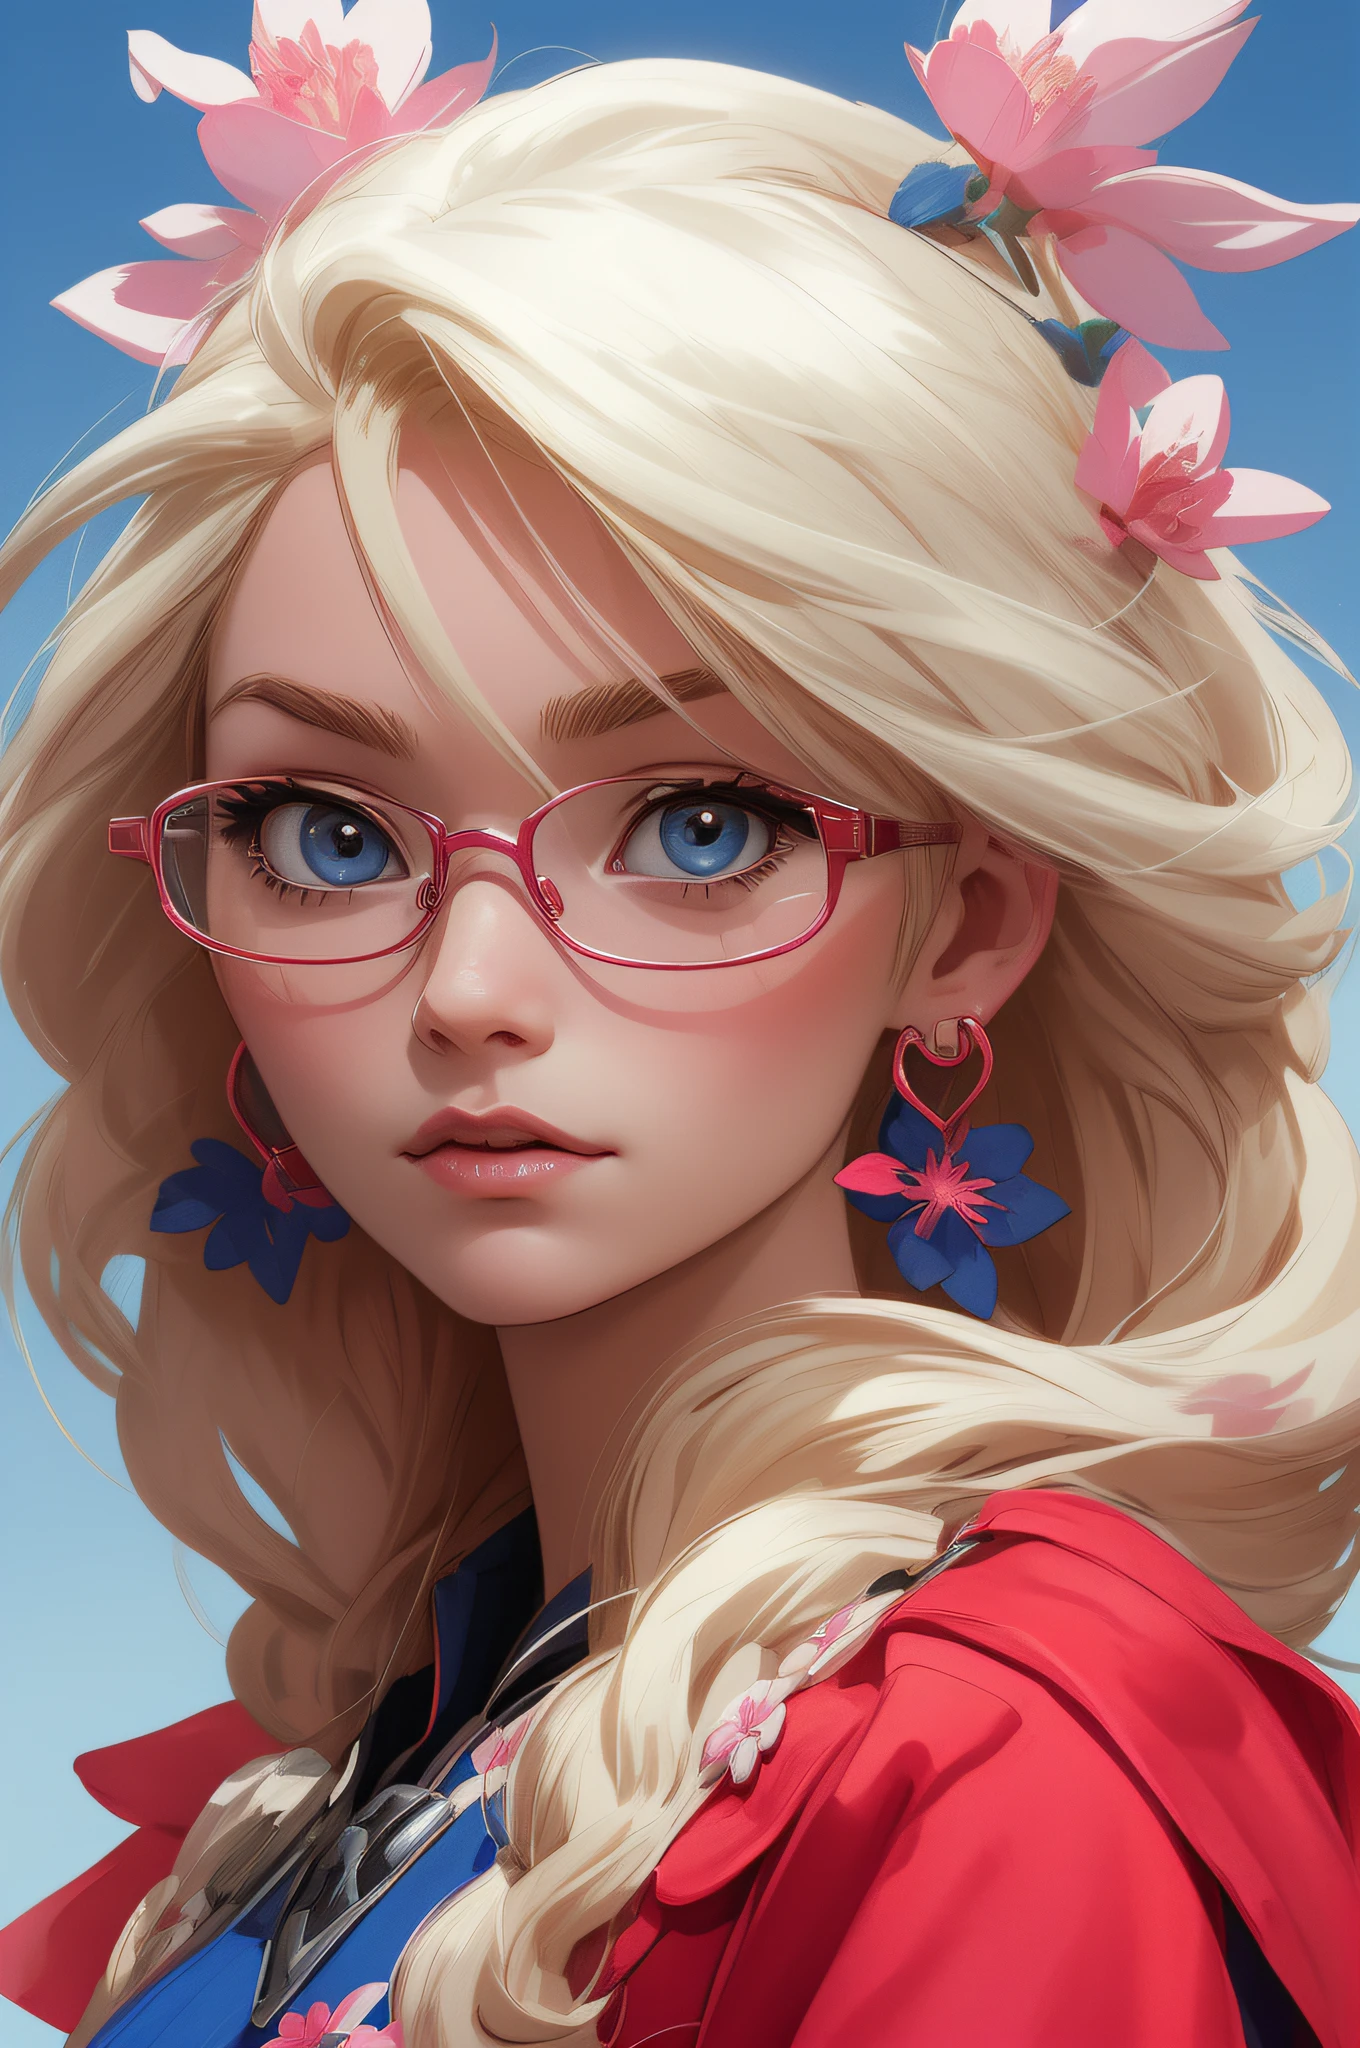 (NIJIFTB), a yellow hair, and long hair, and a cartoon character with glasses, wearing red armor and pink earrings, and a blue dress with pink flowers on the shoulders,